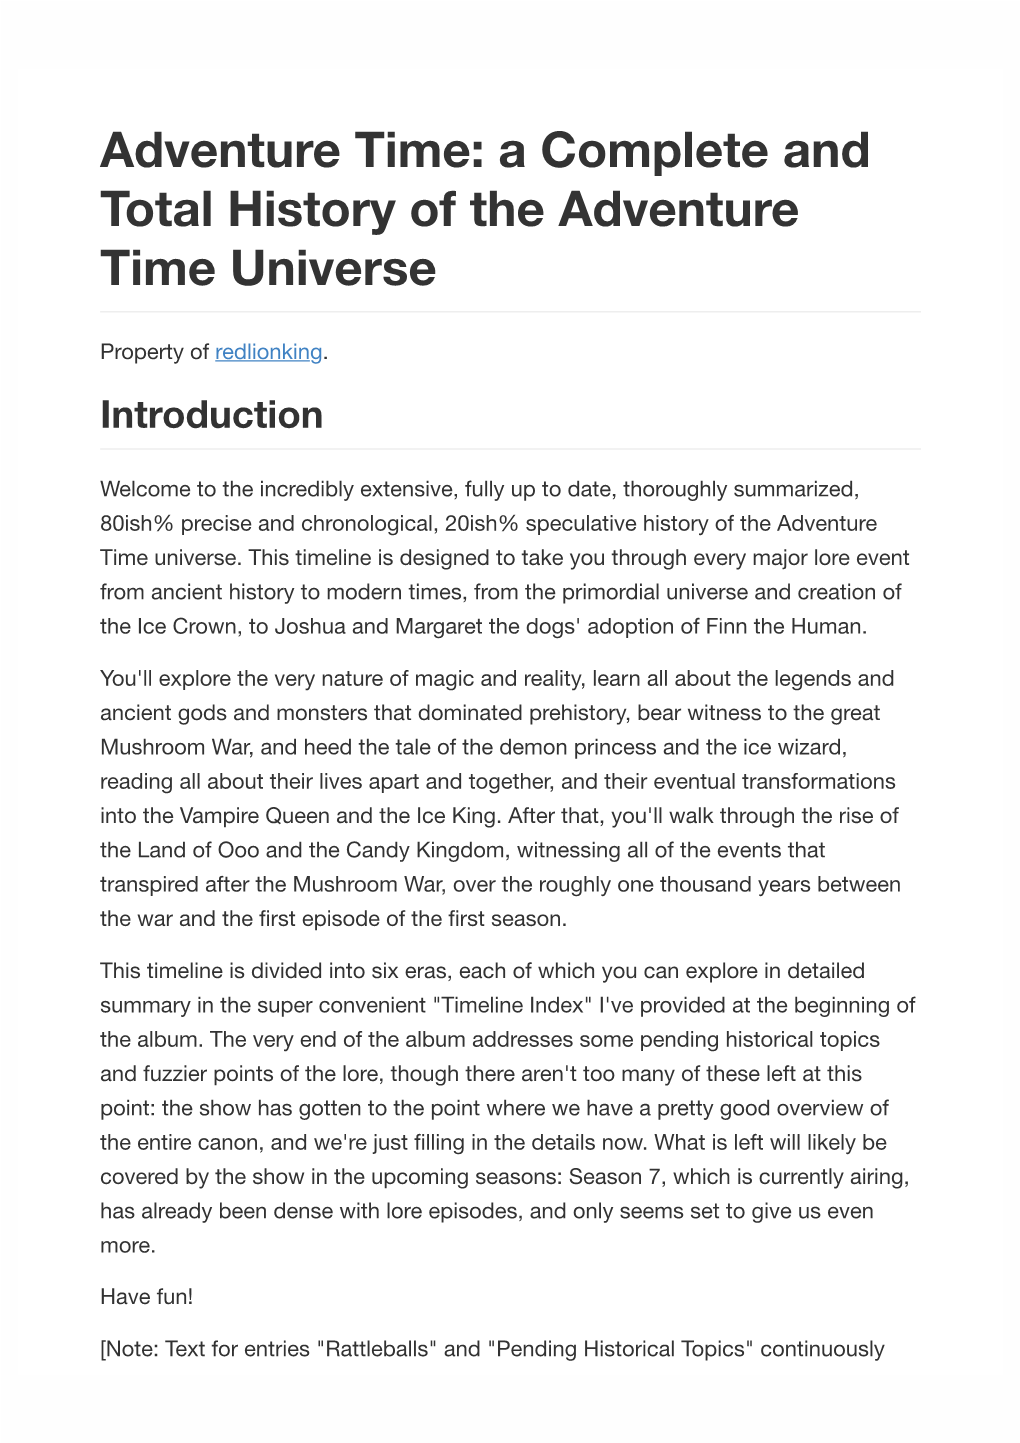 A Complete and Total History of the Adventure Time Universe